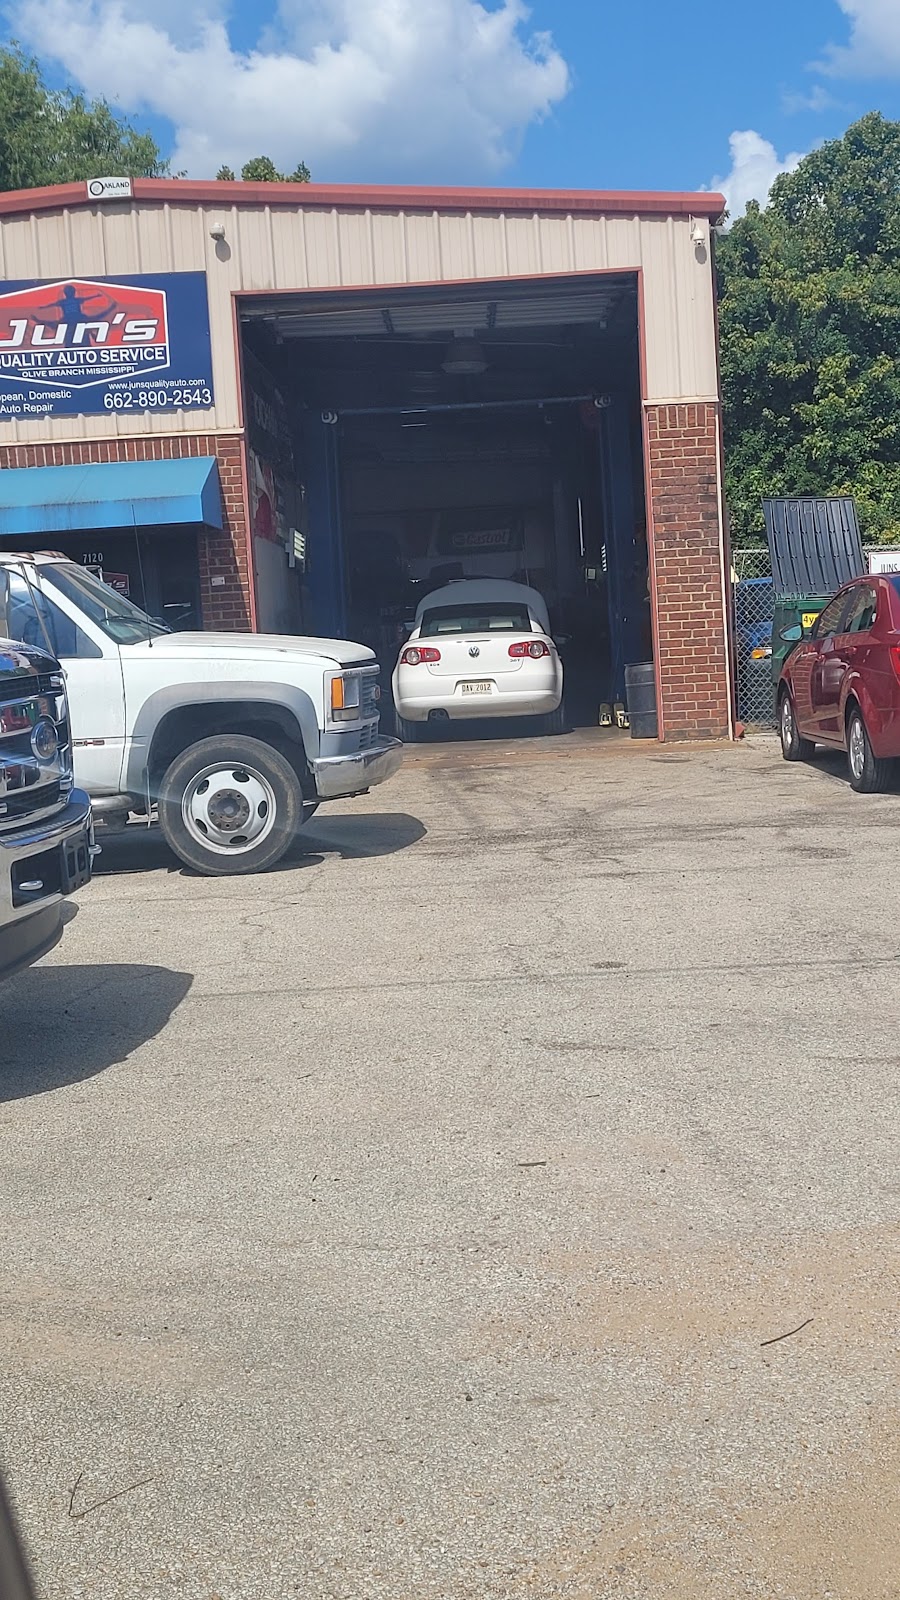 Juns Quality Auto Services | 7120 MS-178, Olive Branch, MS 38654, USA | Phone: (662) 890-2543